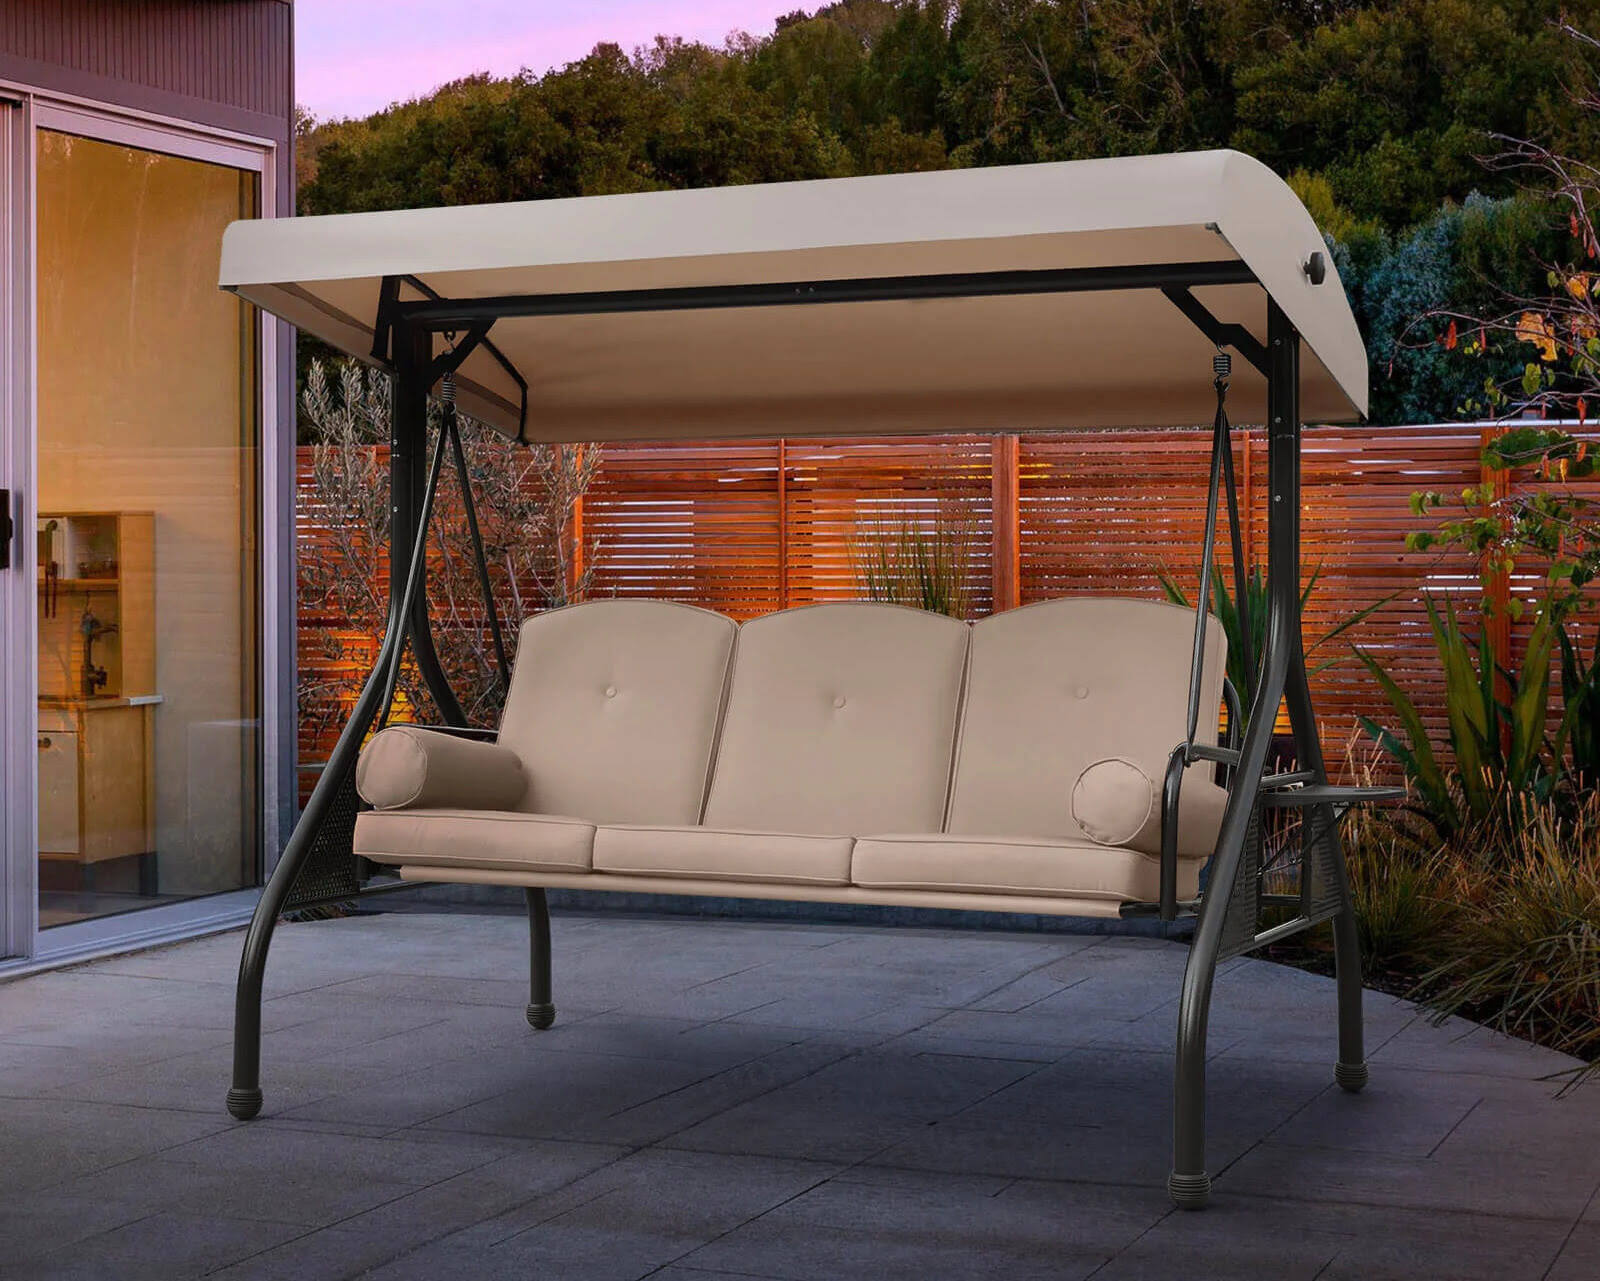 Where To Buy Replacement Cushions For Porch Swing With Canopy?